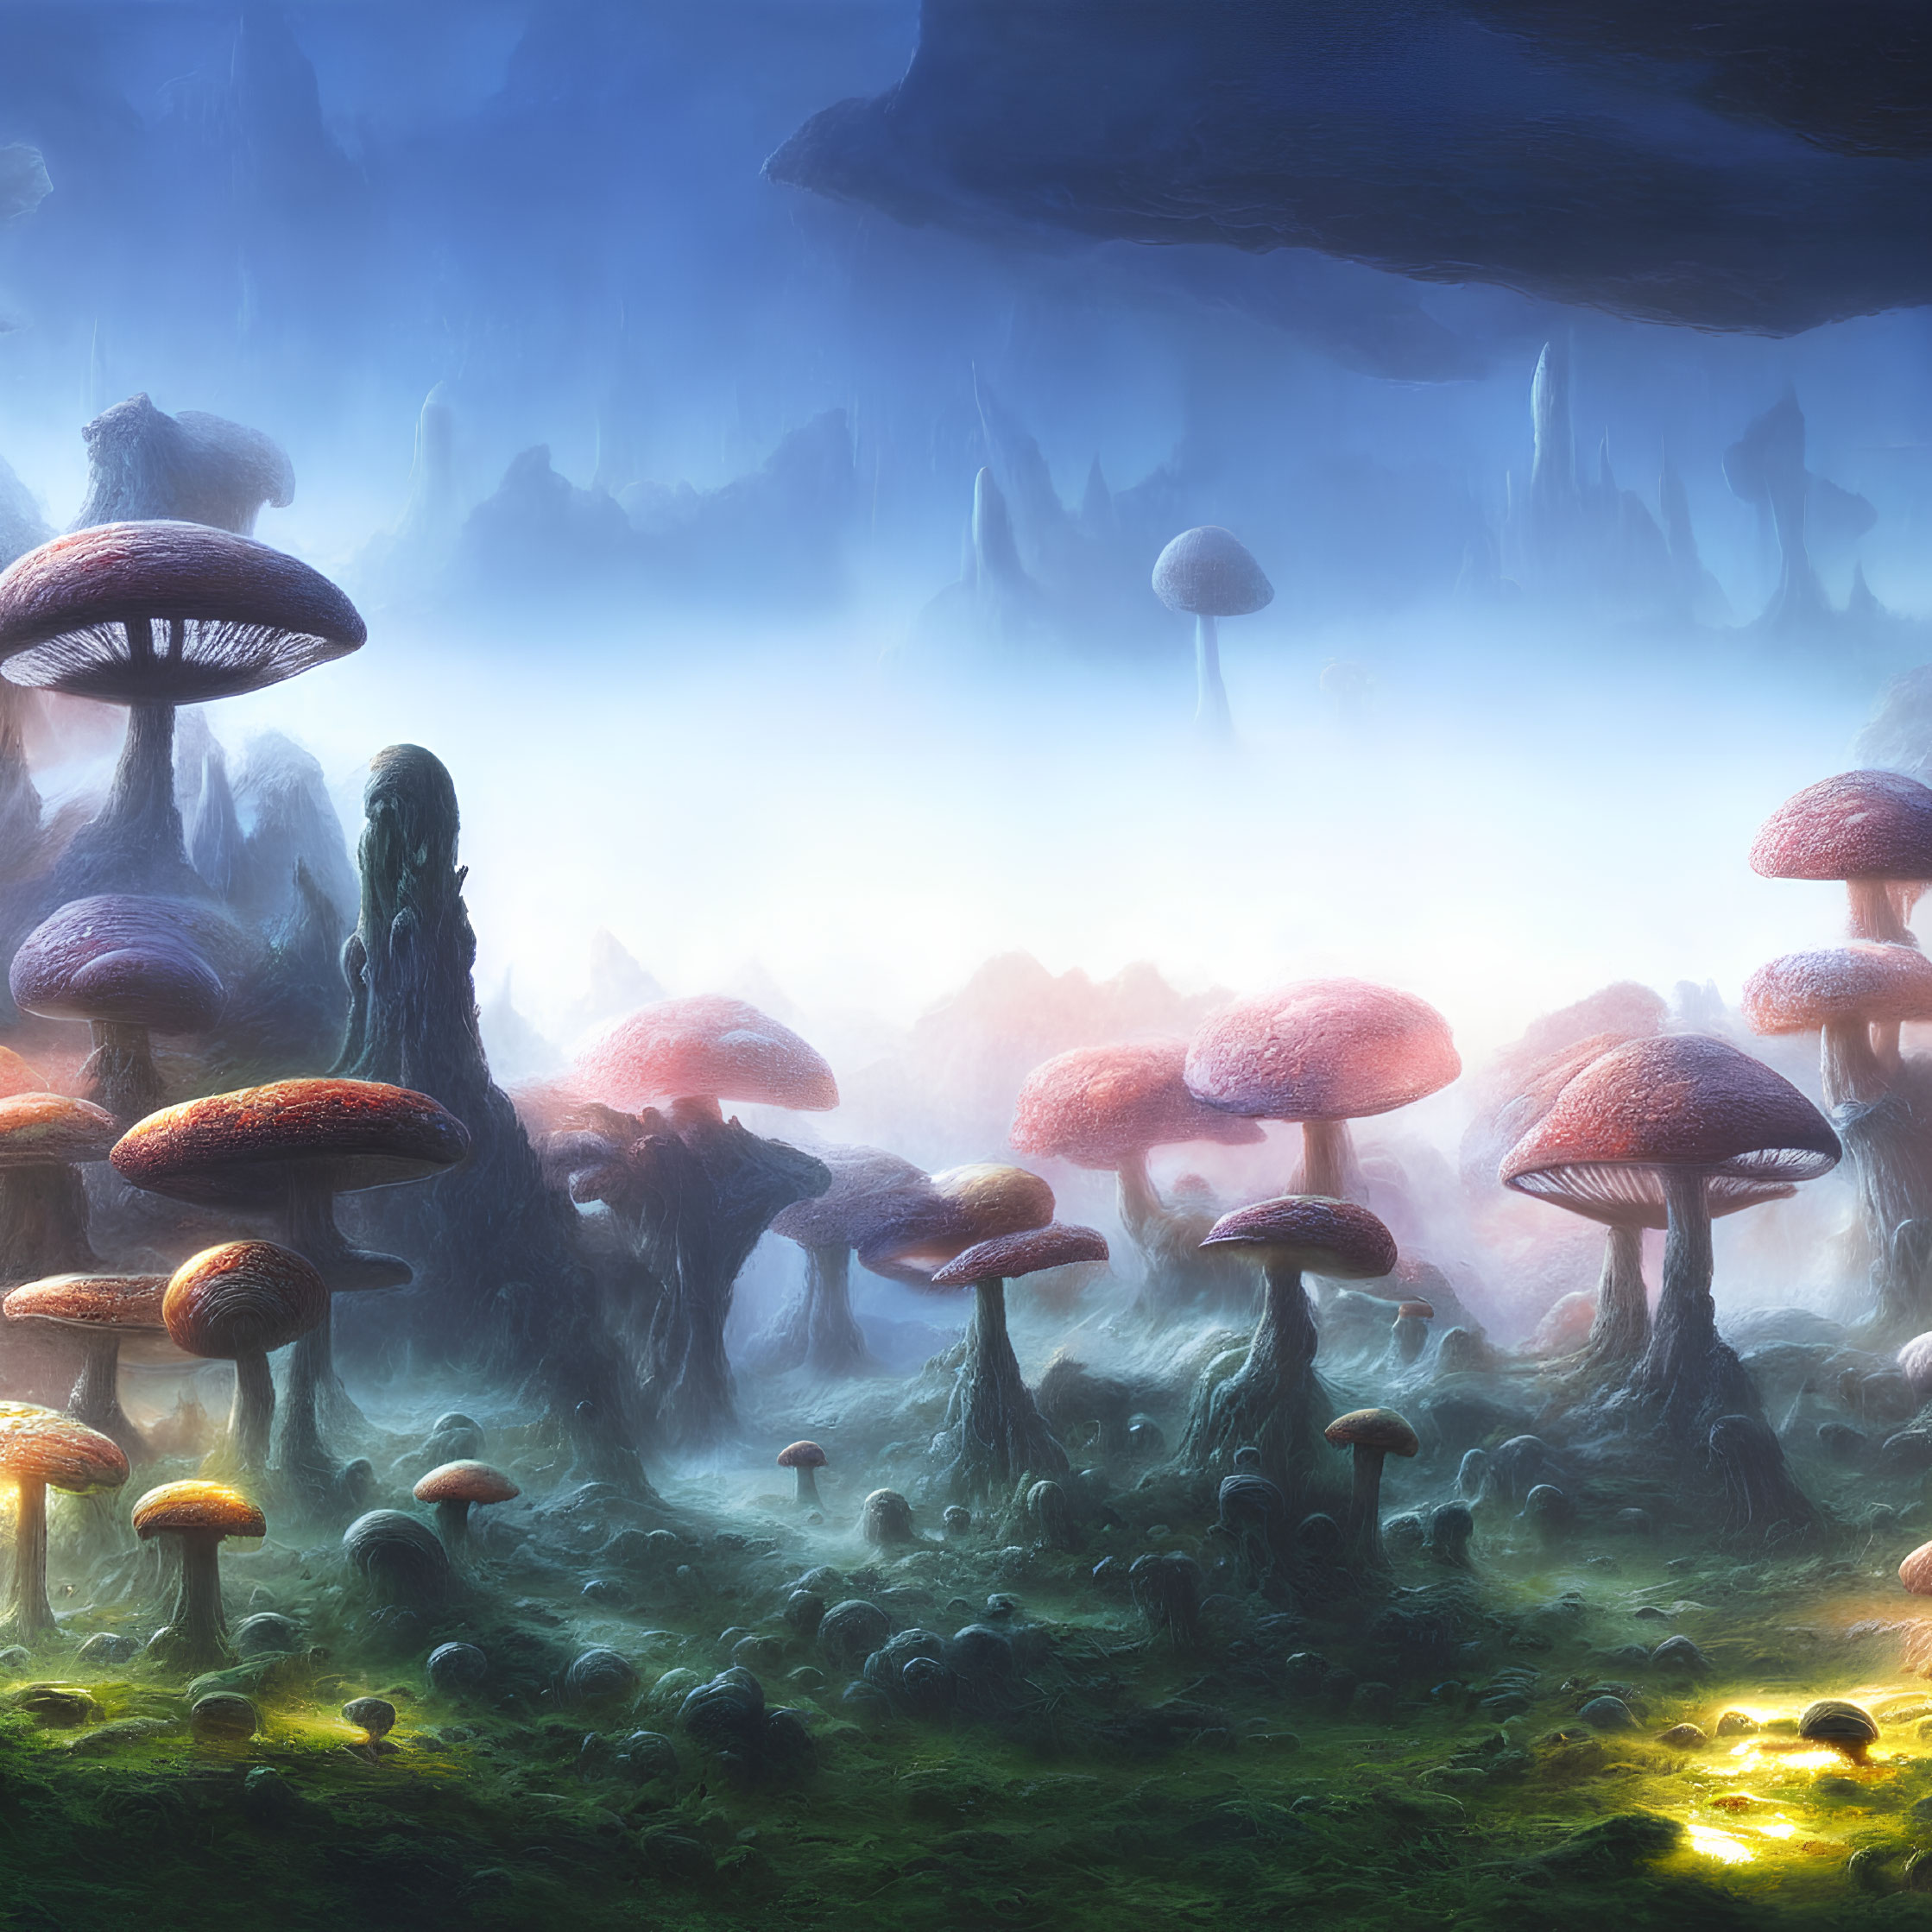 Mystical forest with oversized bioluminescent mushrooms in blue light